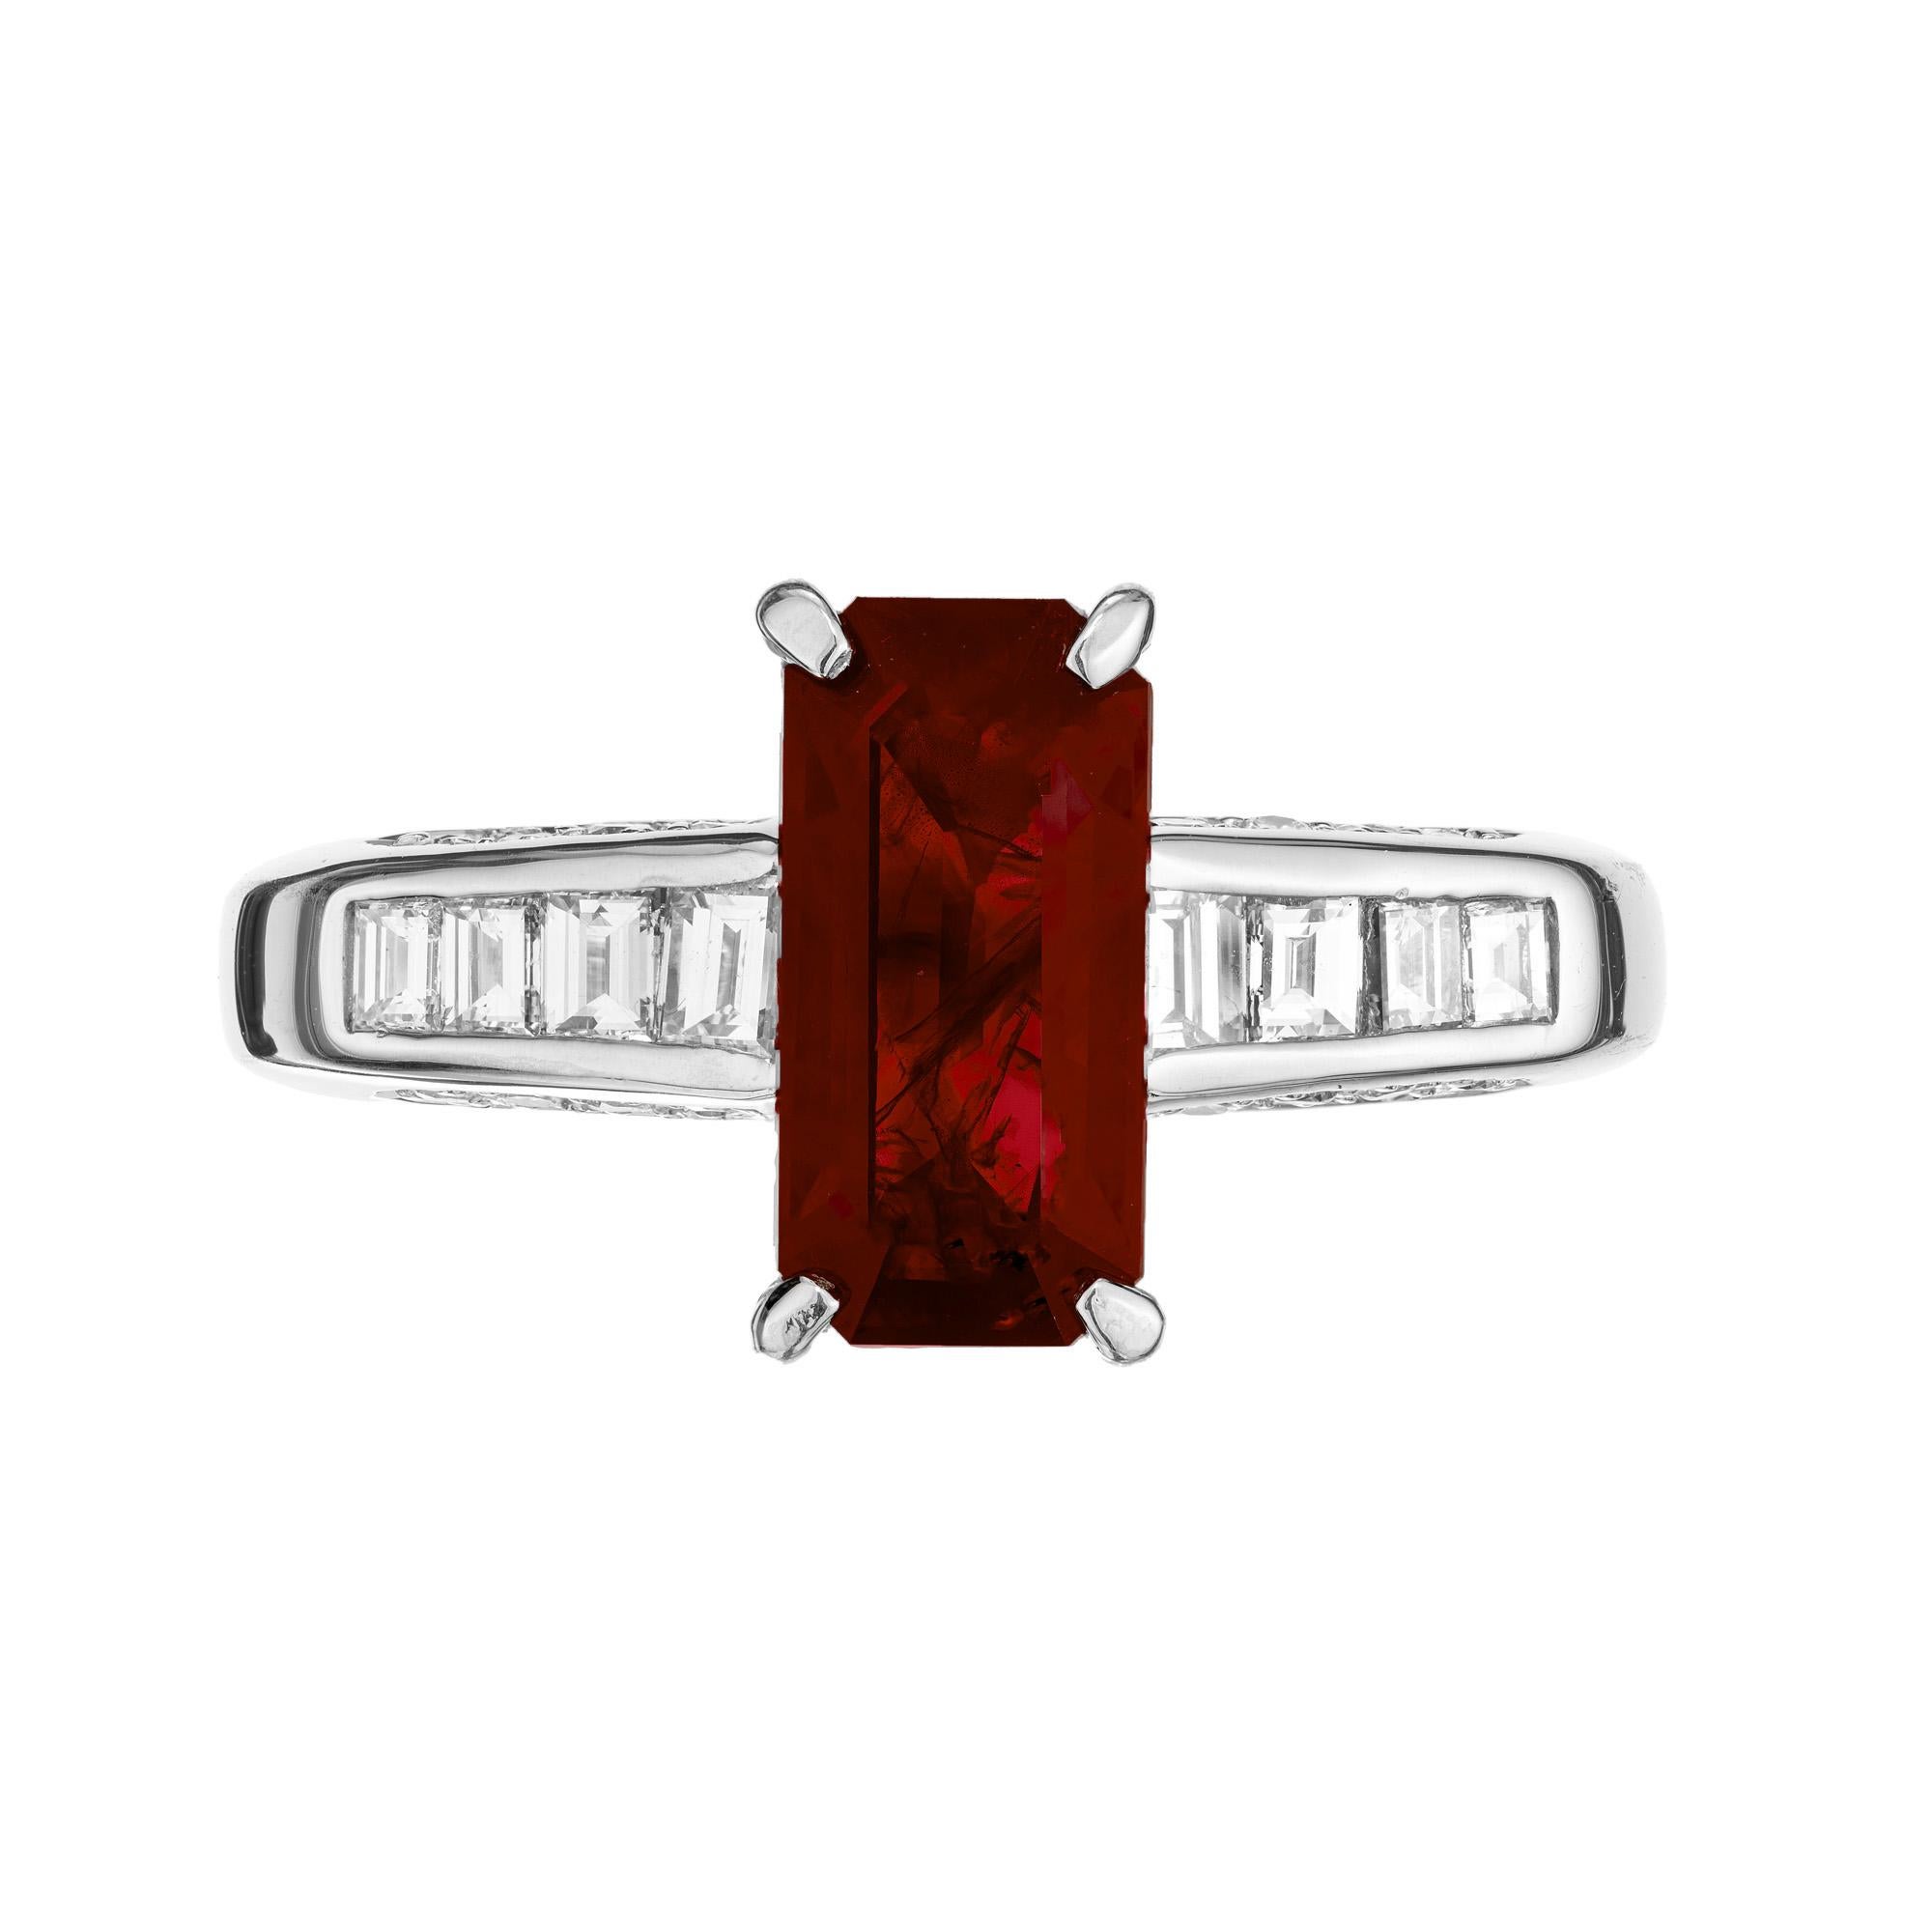 Rare and unusual elongated emerald cut natural Burma, Myanmar, ruby and diamond ring. The center piece of this ring is a 2.15ct octagonal ruby, which is mounted in a platinum setting. Accented with 8 square step cut diamonds and 16 round brilliant